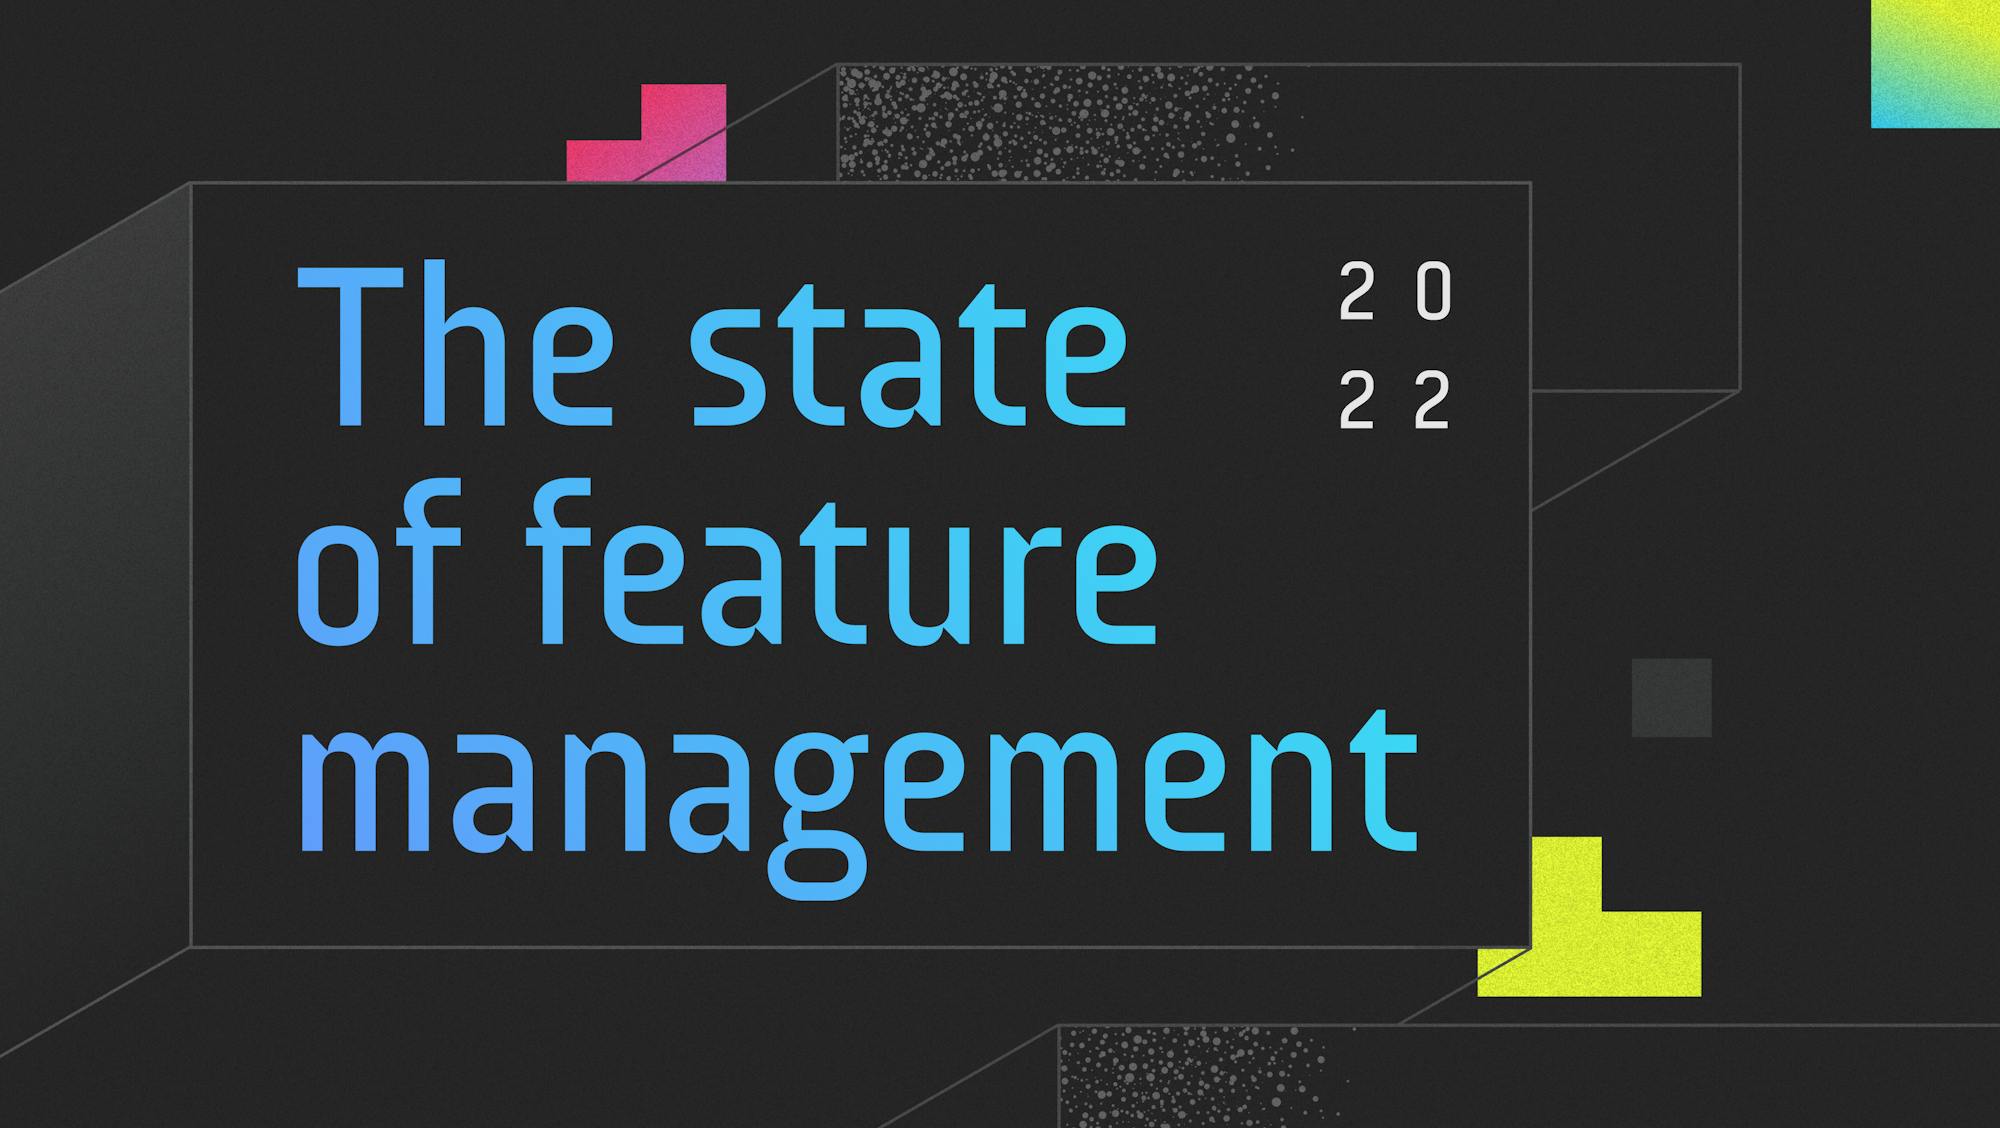 Introducing the 2022 State of Feature Management featured image